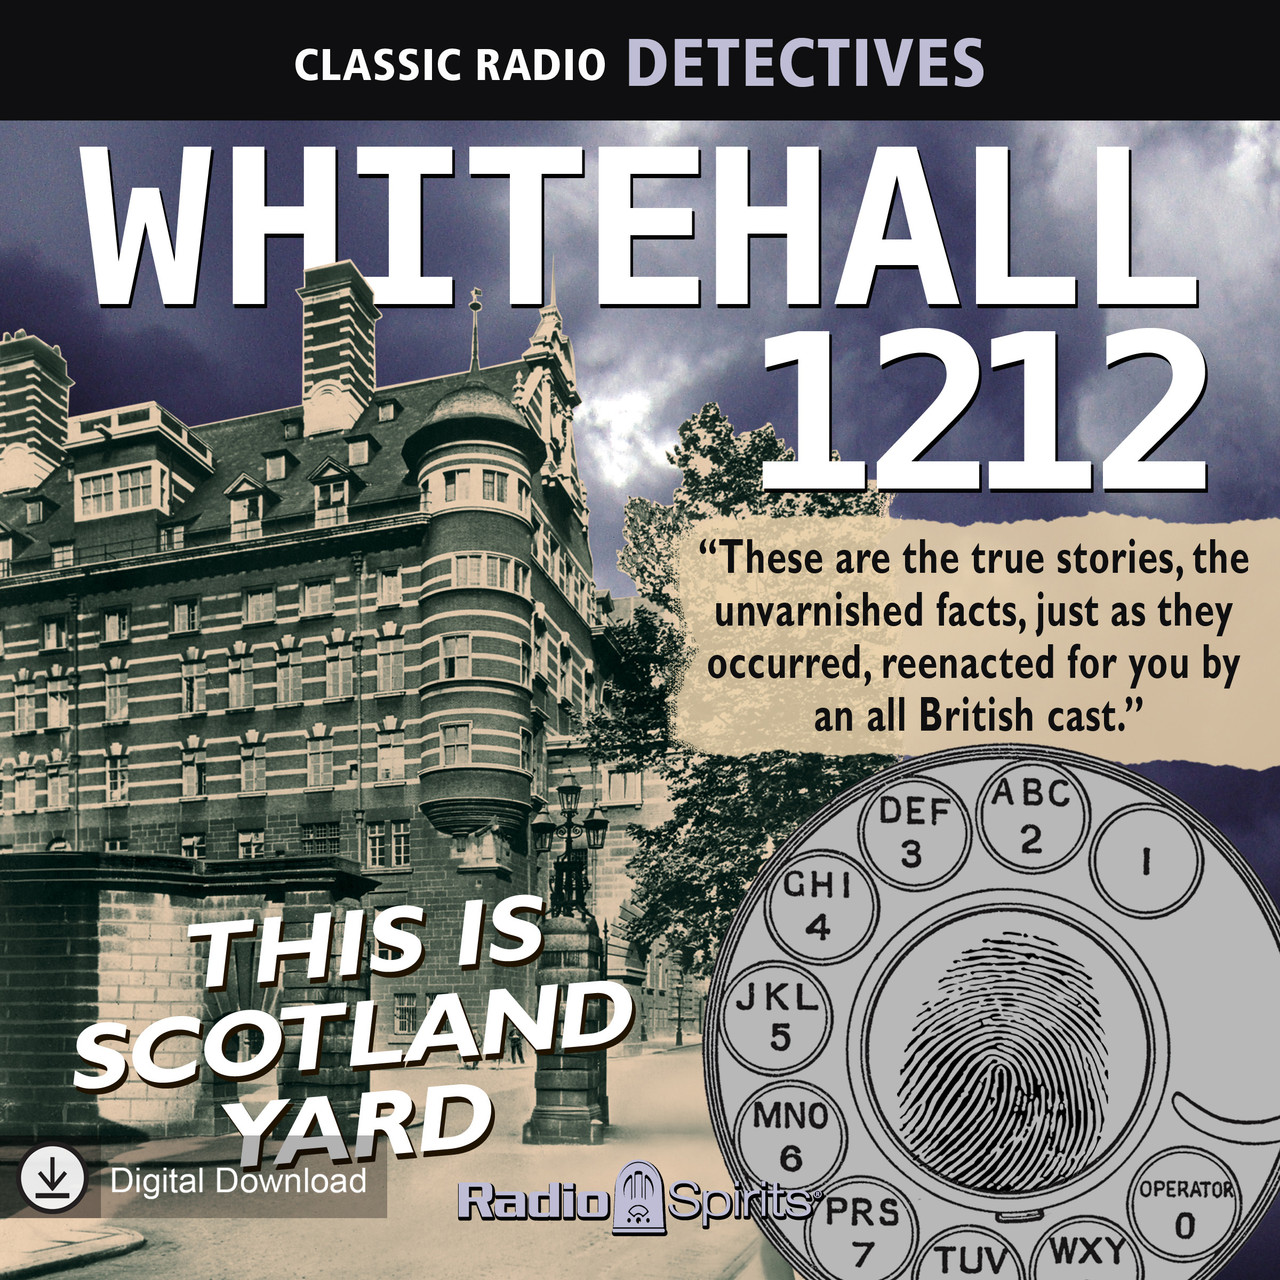 Whitehall 1212: This is Scotland Yard (MP3 Download)